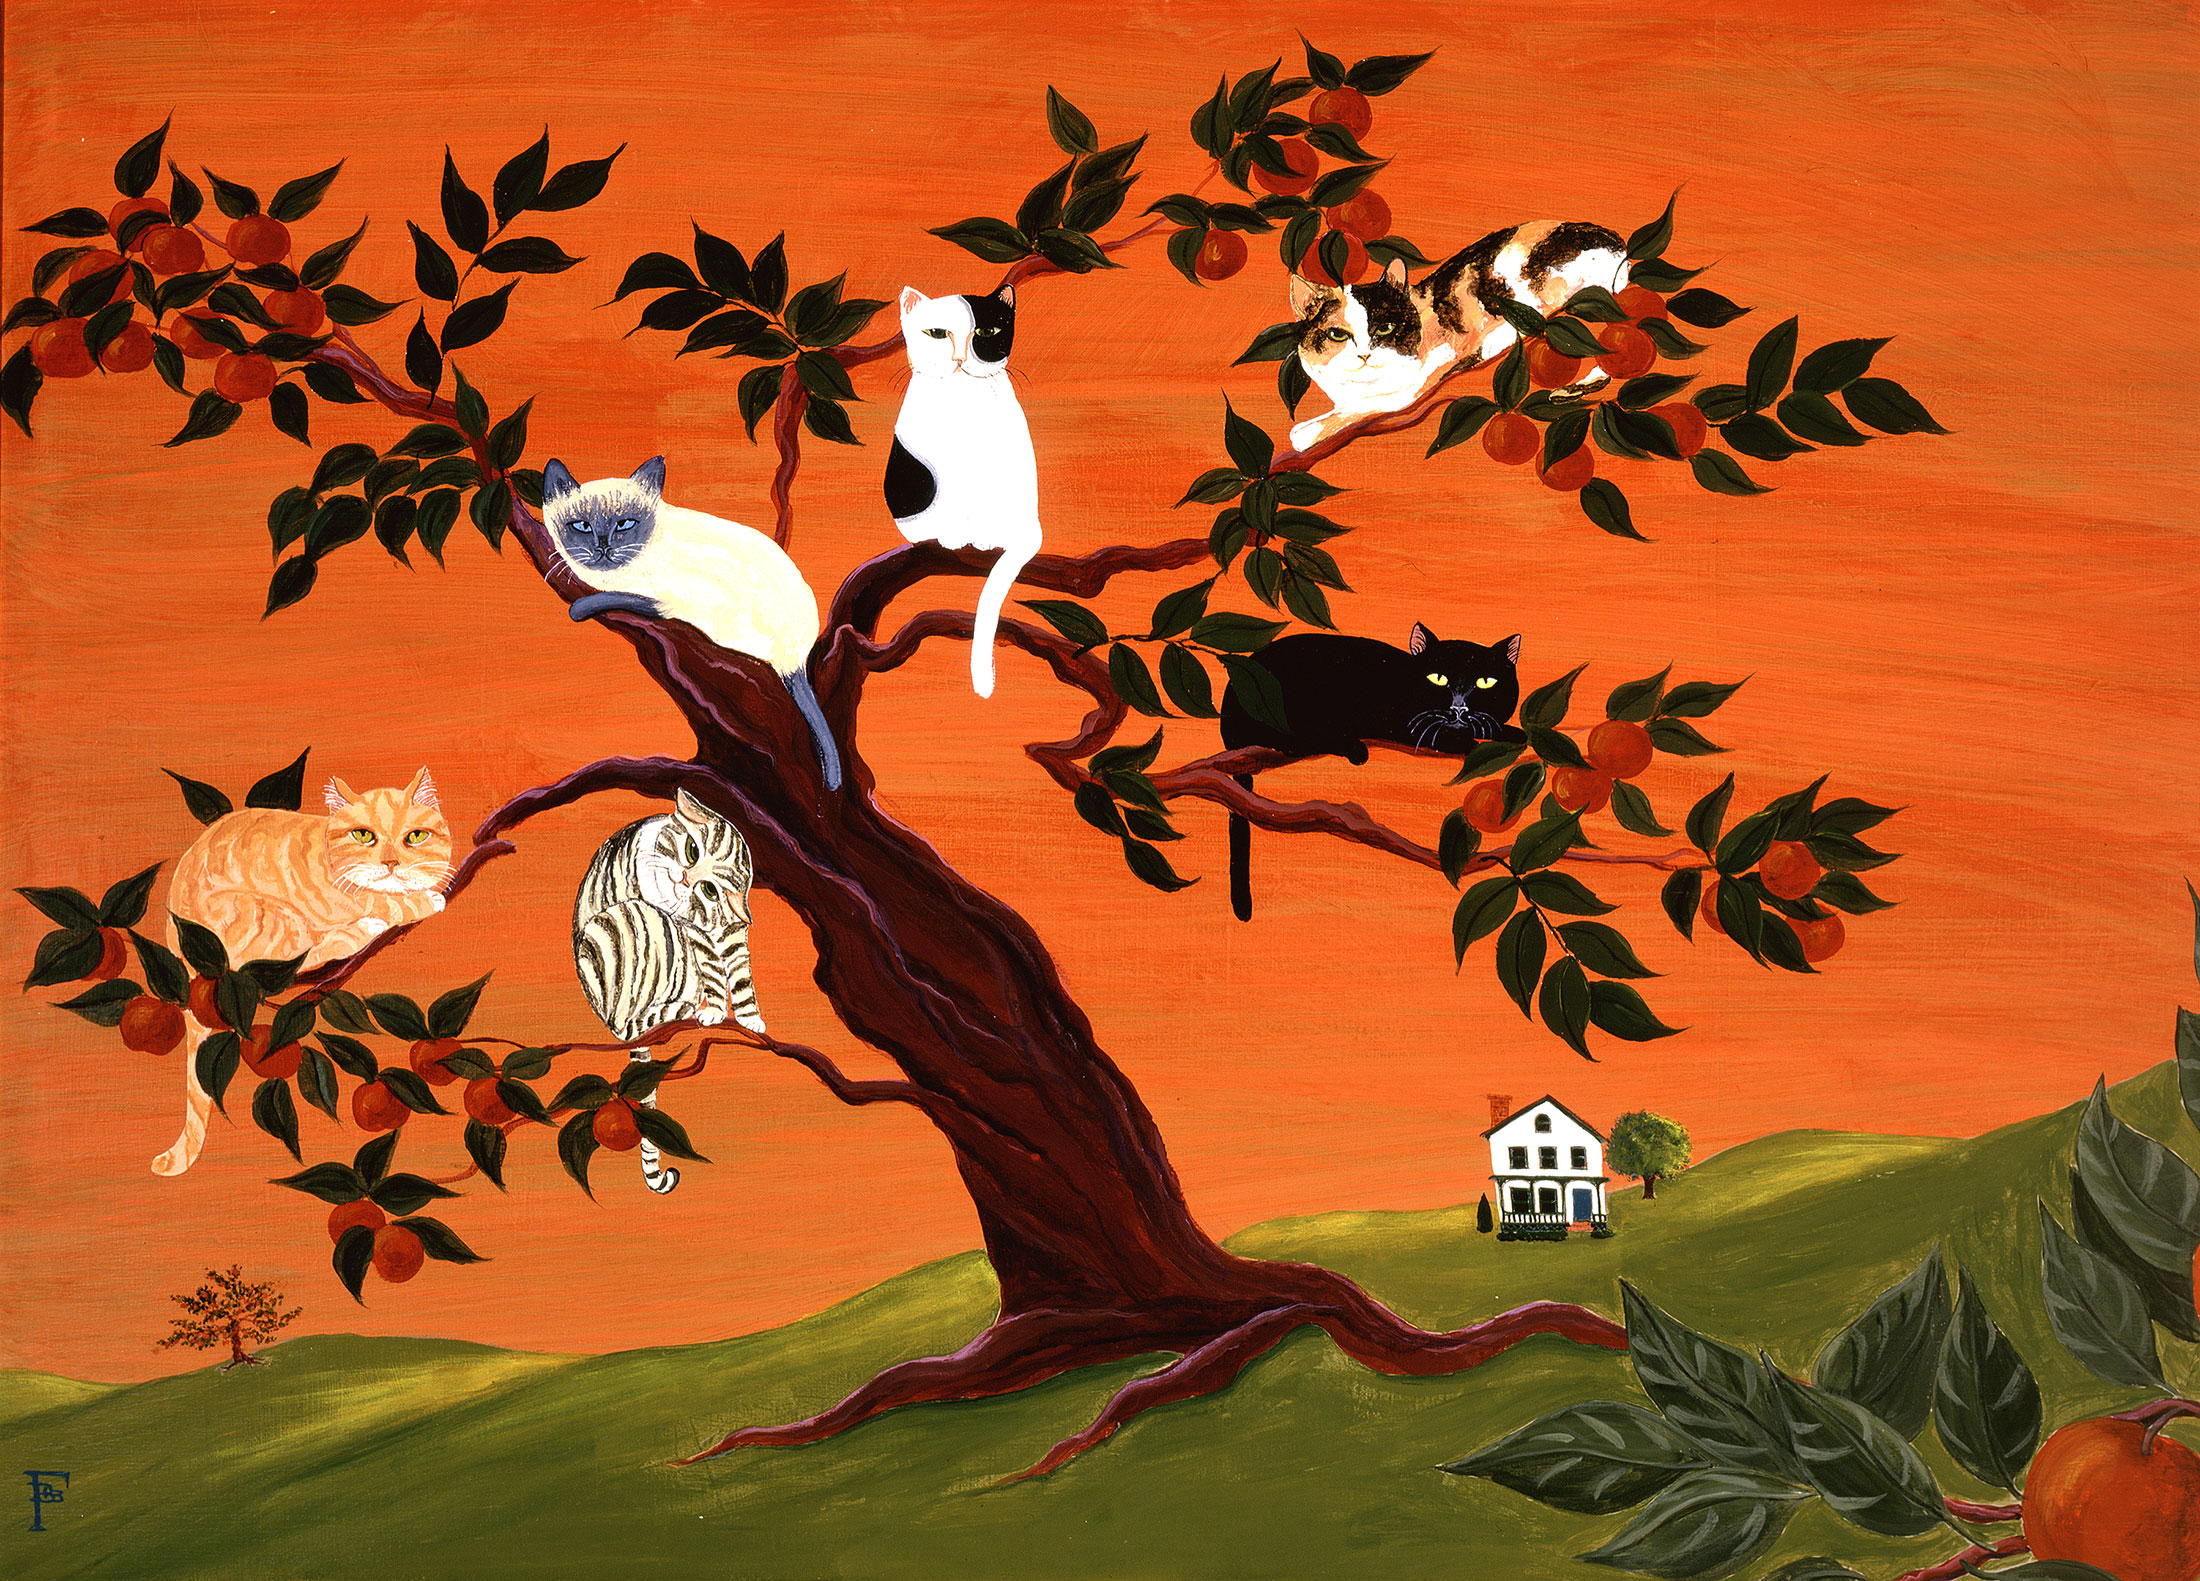 Cats in Tree